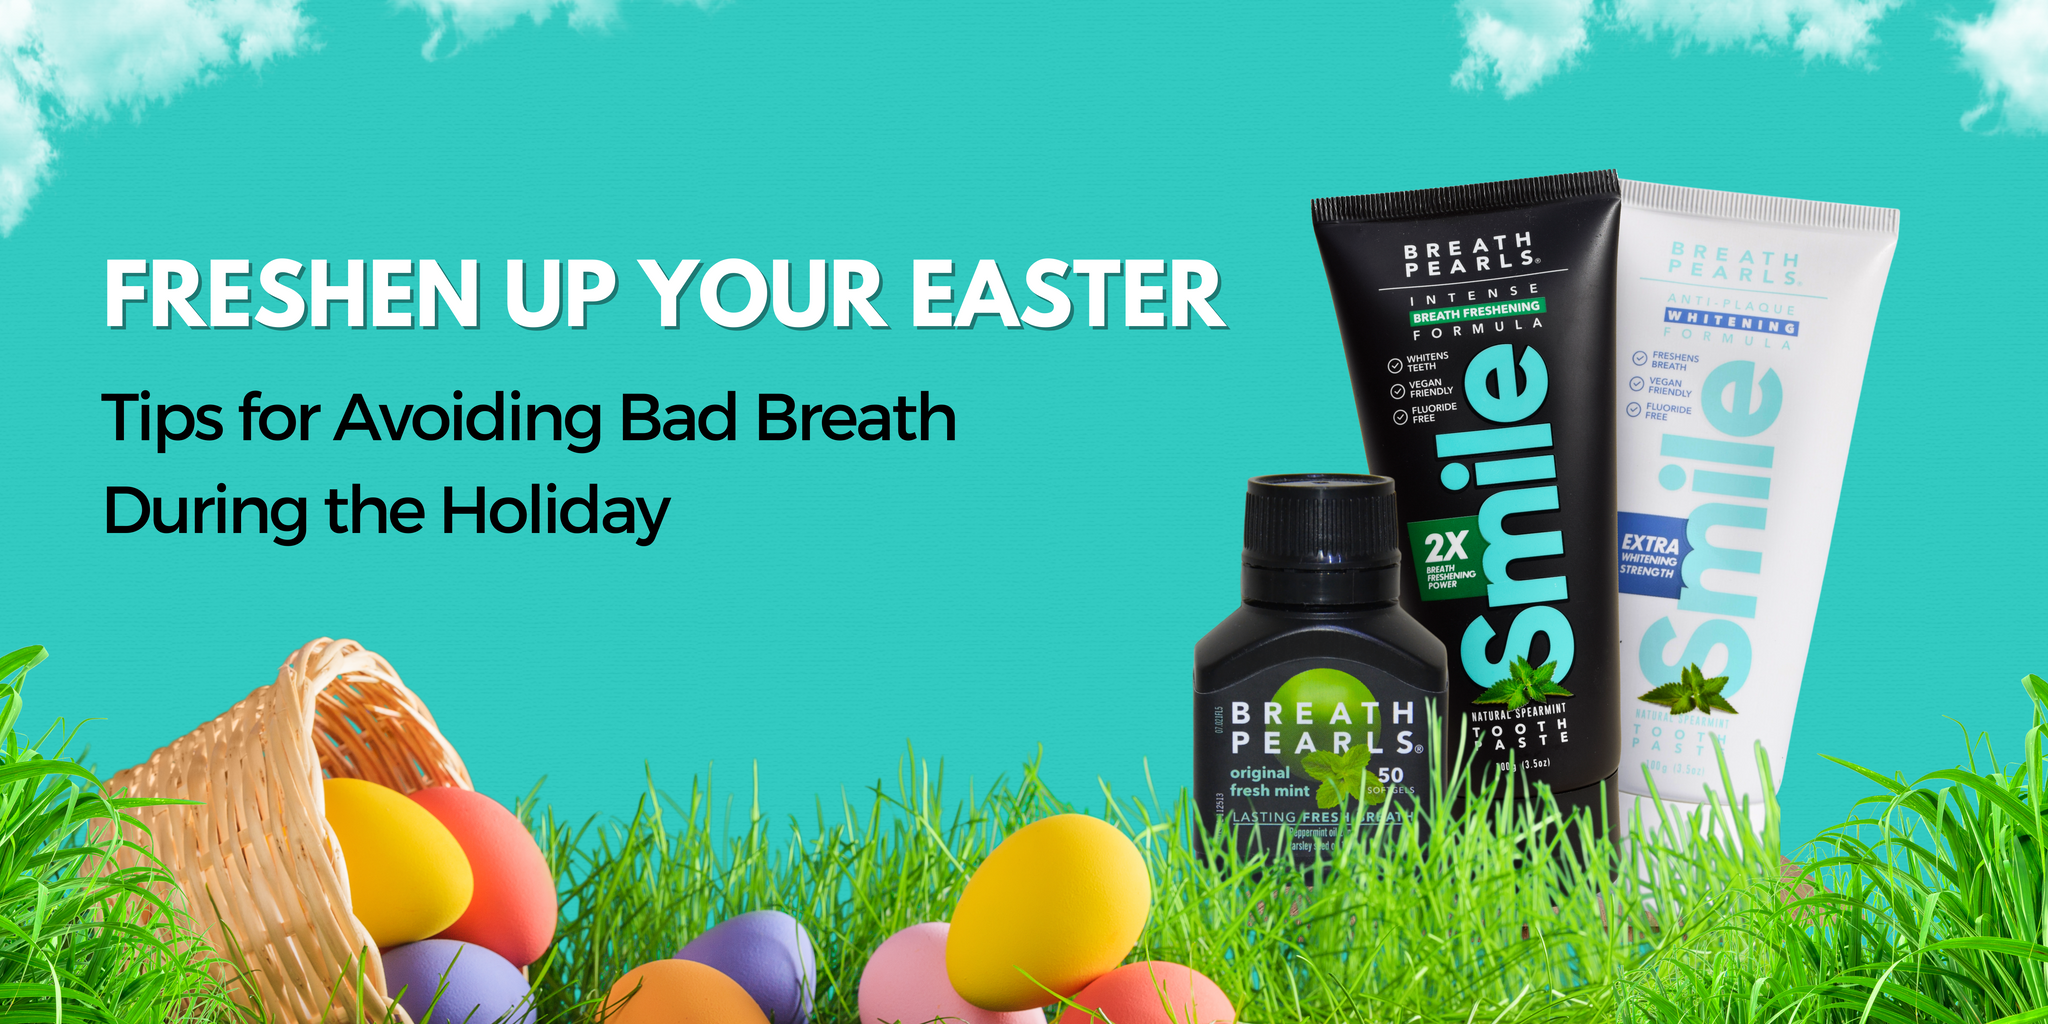 Freshen Up Your Easter: Tips for Avoiding Bad Breath During the Holiday